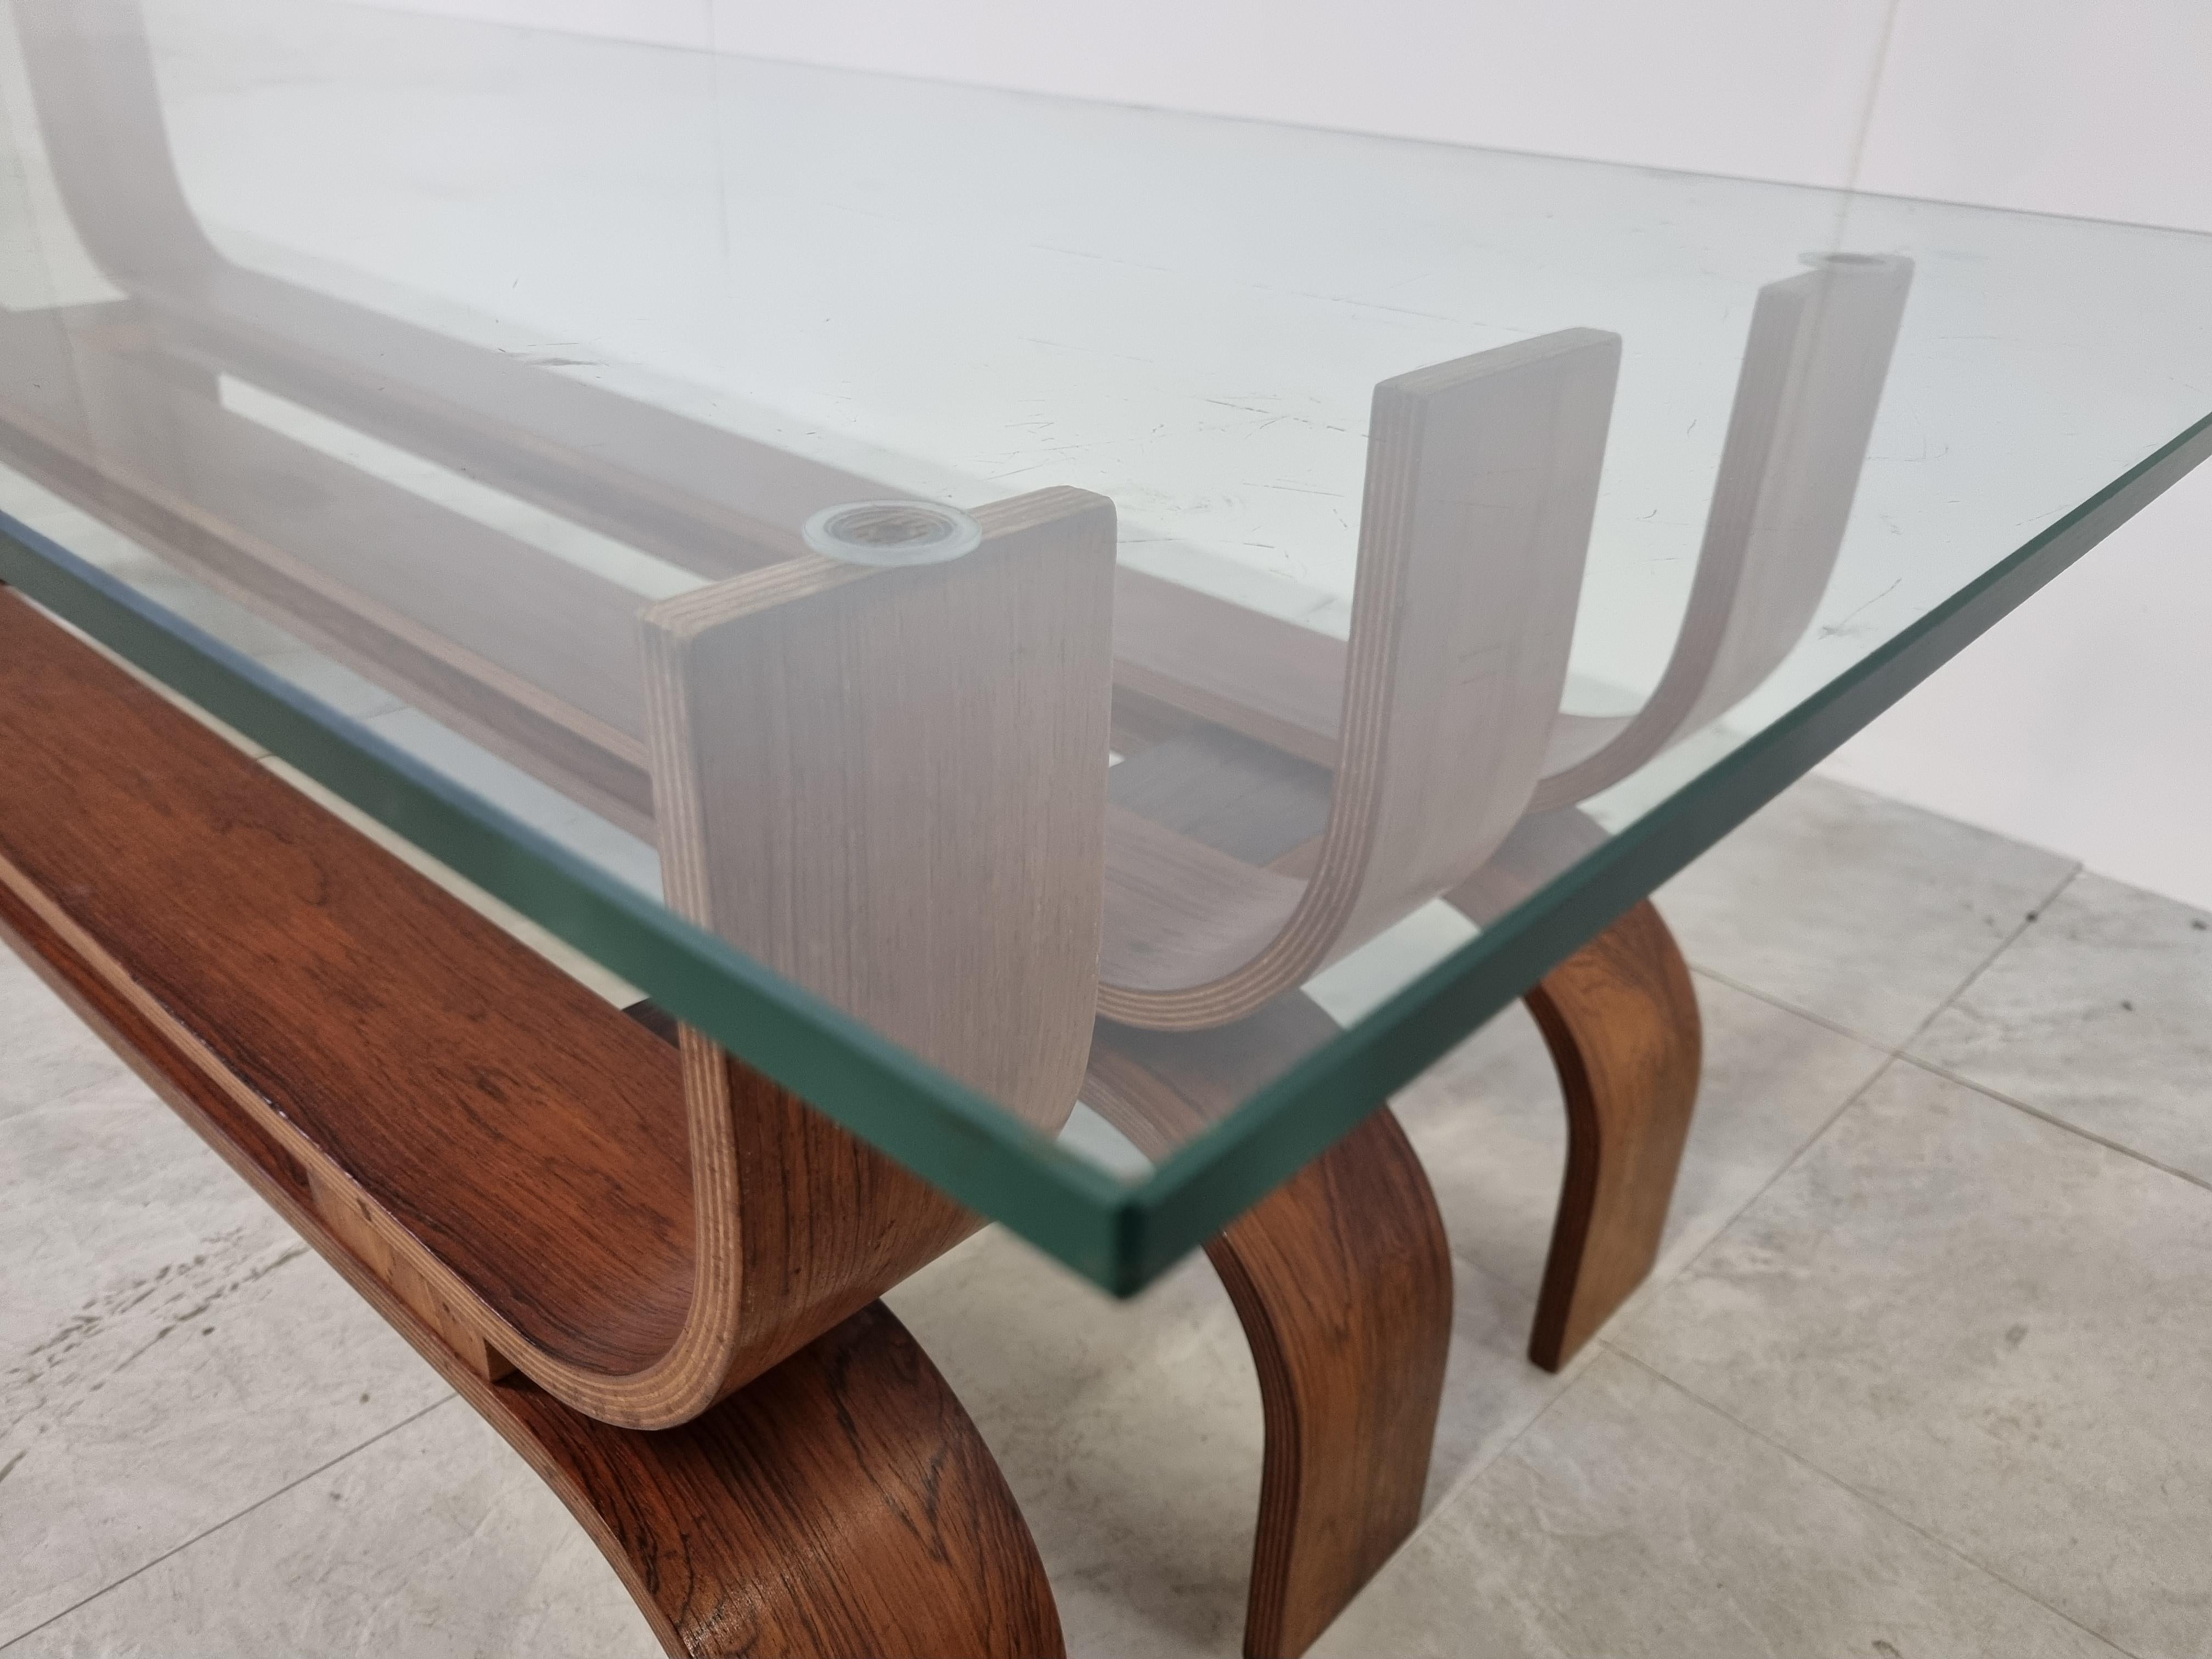 Rare mid century bent teak coffee table with a clear glass top.

This large coffee table is beautifully crafted and has a timeless look.

1960s - Germany

Good condition

Dimensions:
Height: 46cm/18.11